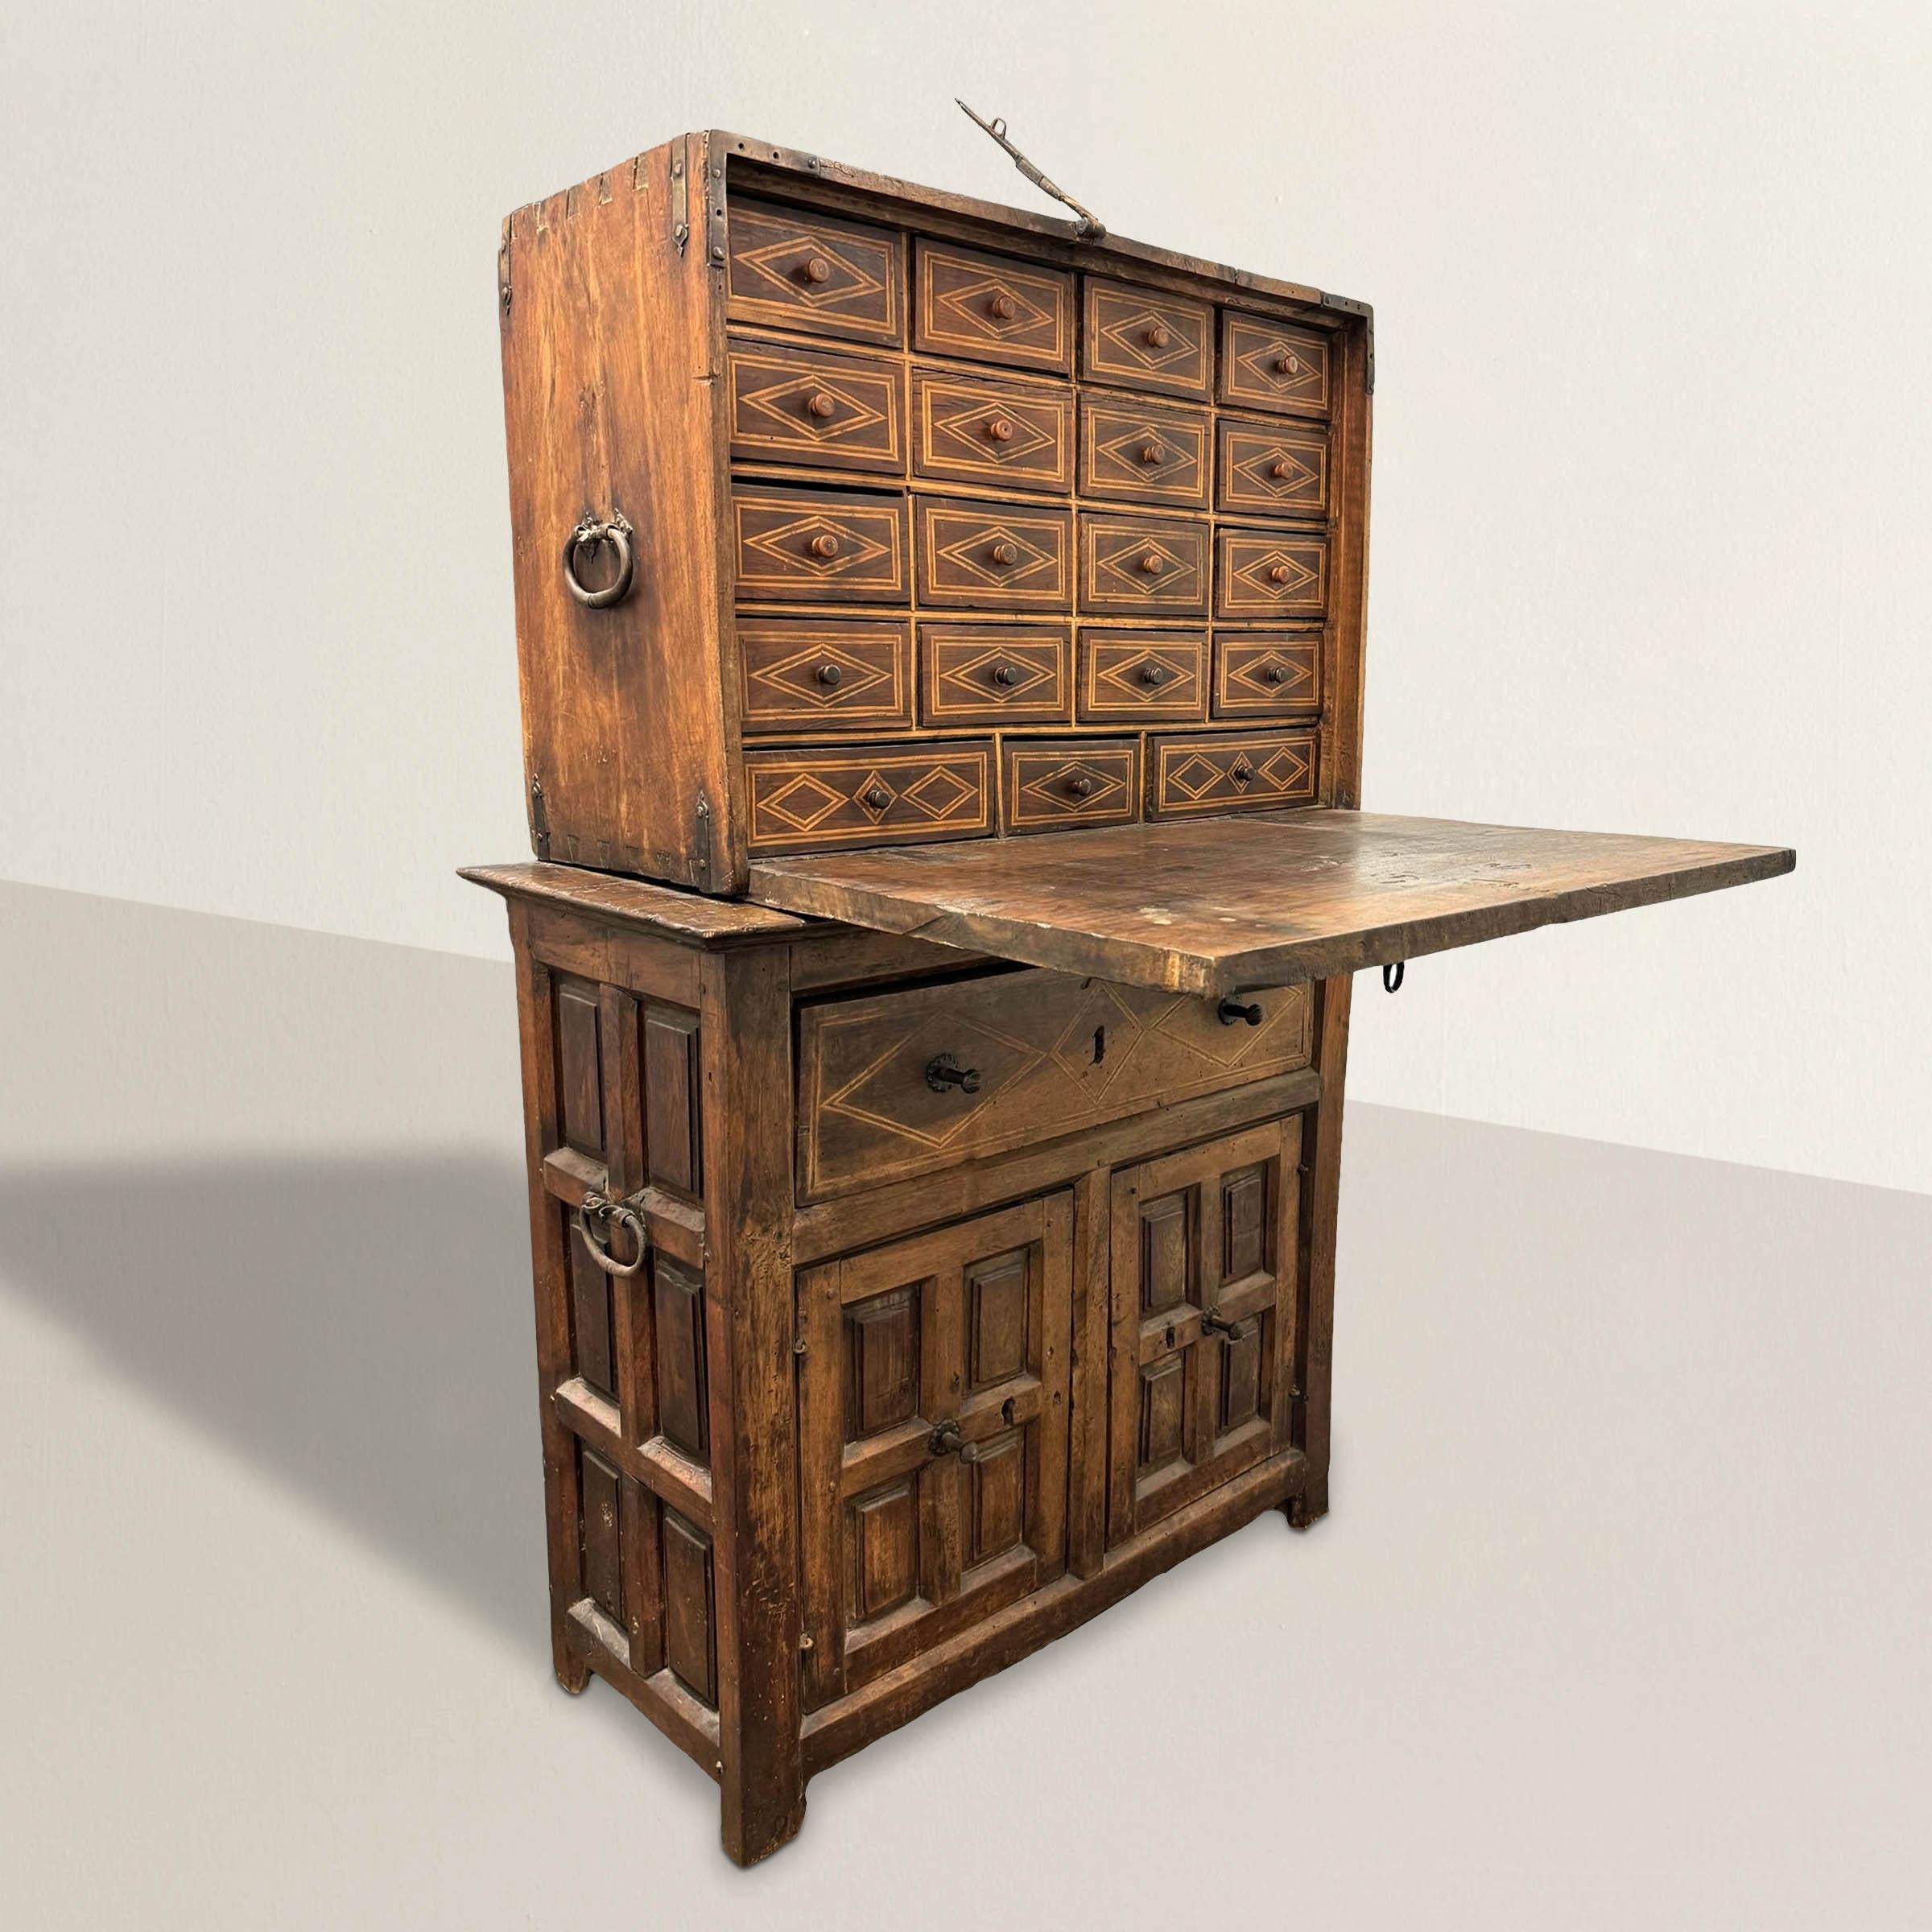 Behold a rare and remarkable treasure from 17th century Spain: the vargueño. Crafted from solid one-inch thick walnut panels, this vargueño stands as a testament to the masterful craftsmanship of its time. The writing desk showcases intricate inlaid